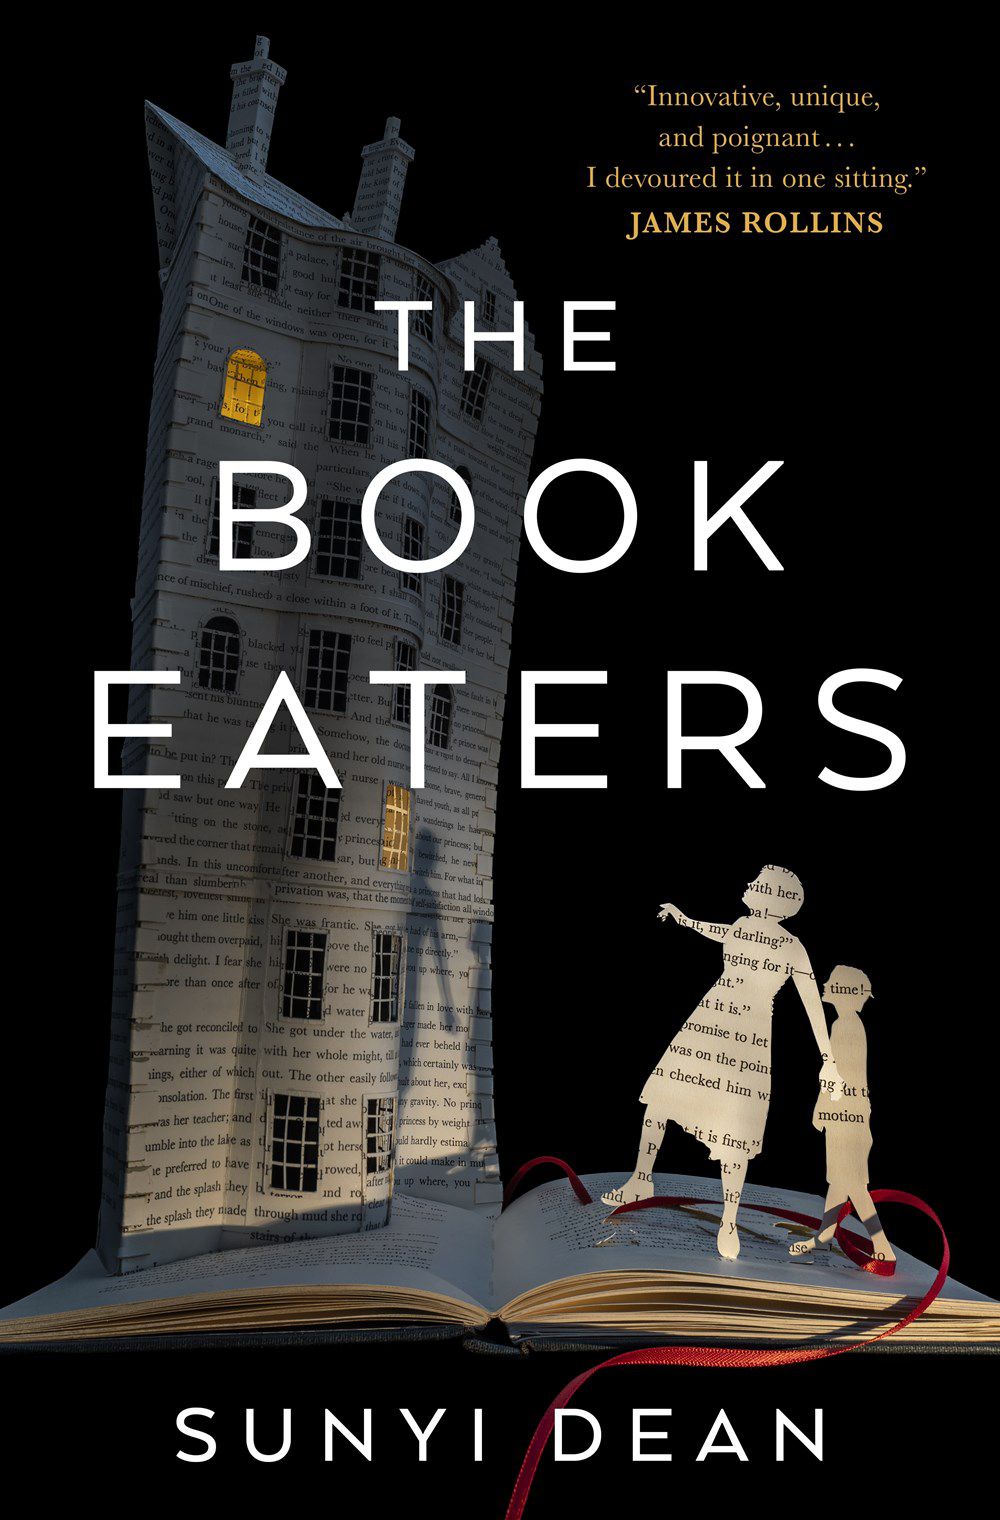 Cover image of The Book Eaters by Sunyi Dean, featuring a diorama image of a parent and child and a house, all made of pages from a book, while standing on a book.